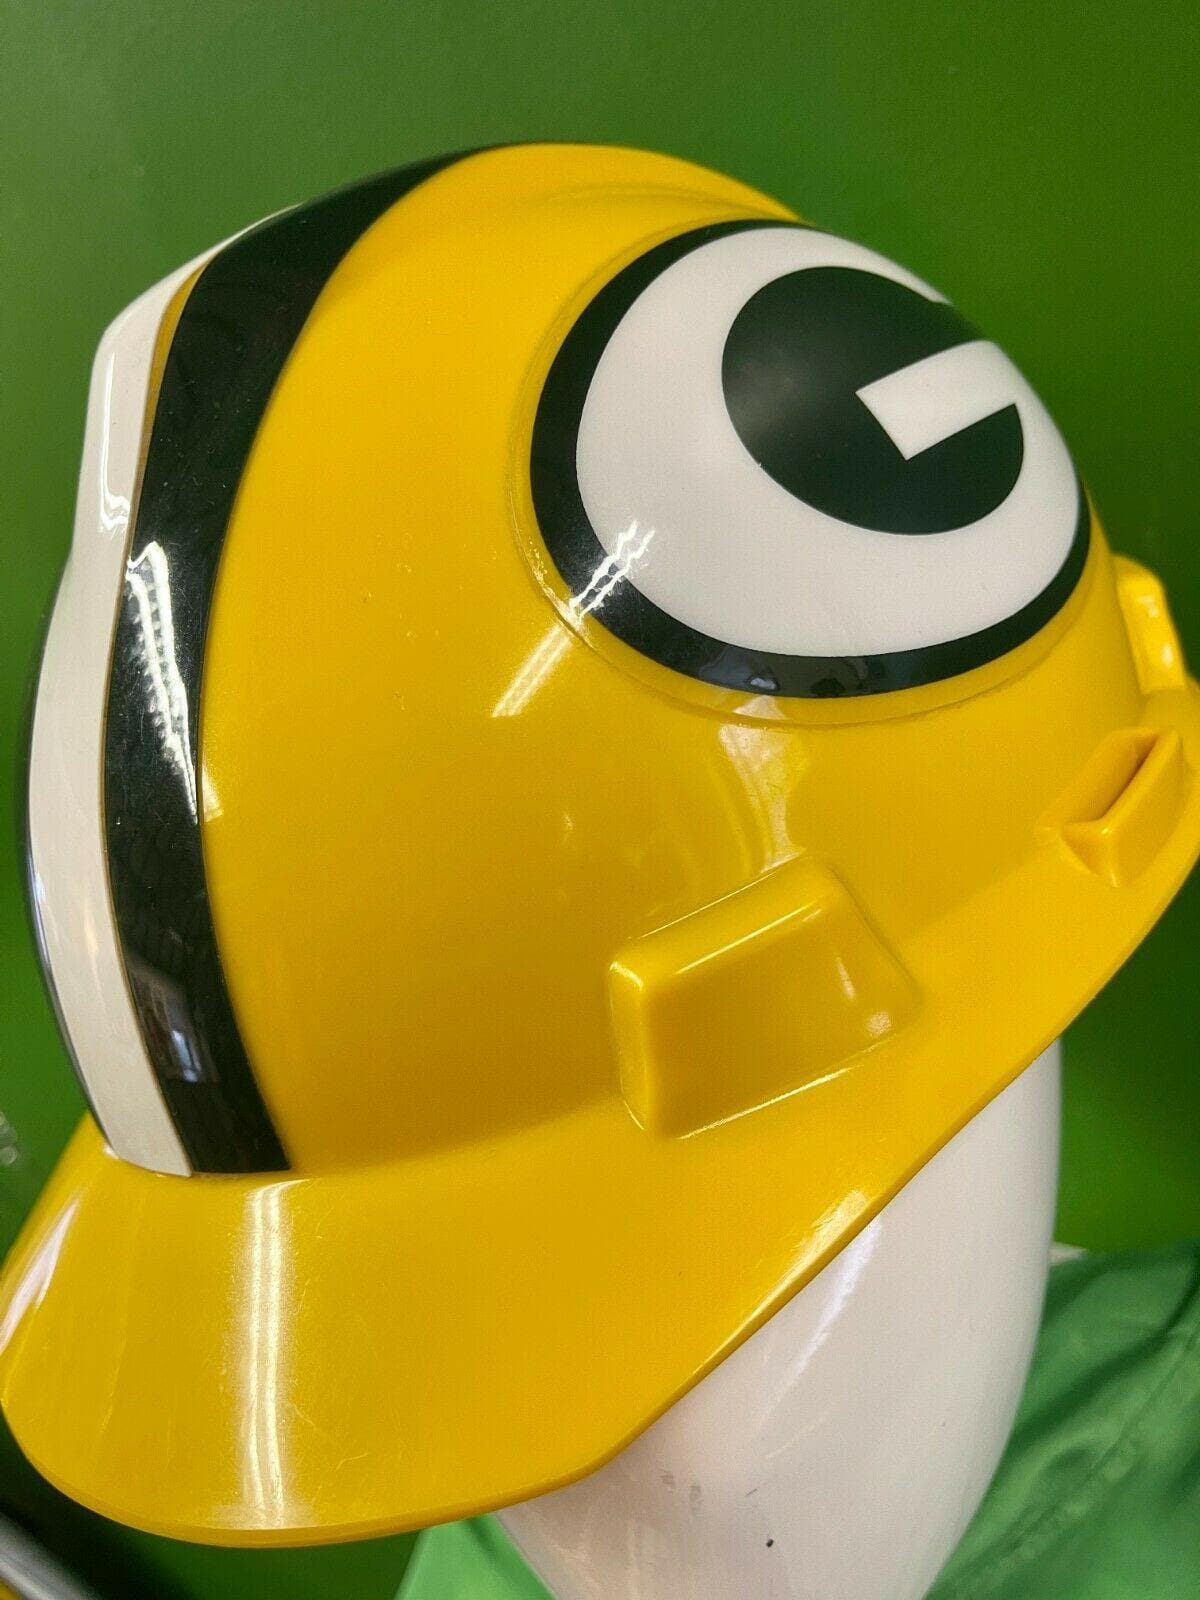 NFL Green Bay Packers Construction Helmet OSFA Ideal for Fan Cave!